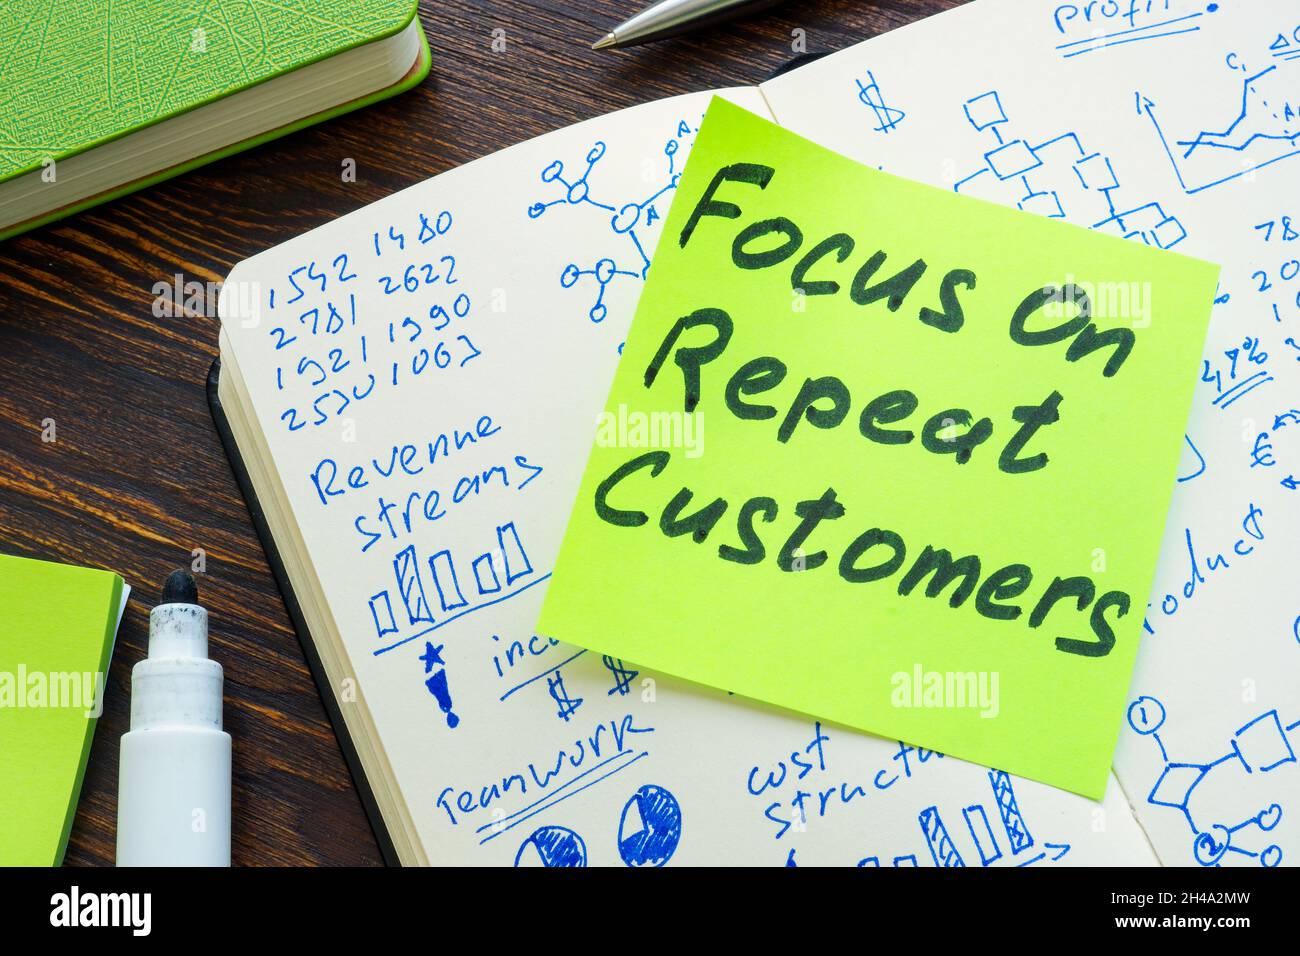 Focus on the repeat customers phrase on the sticker. Stock Photo